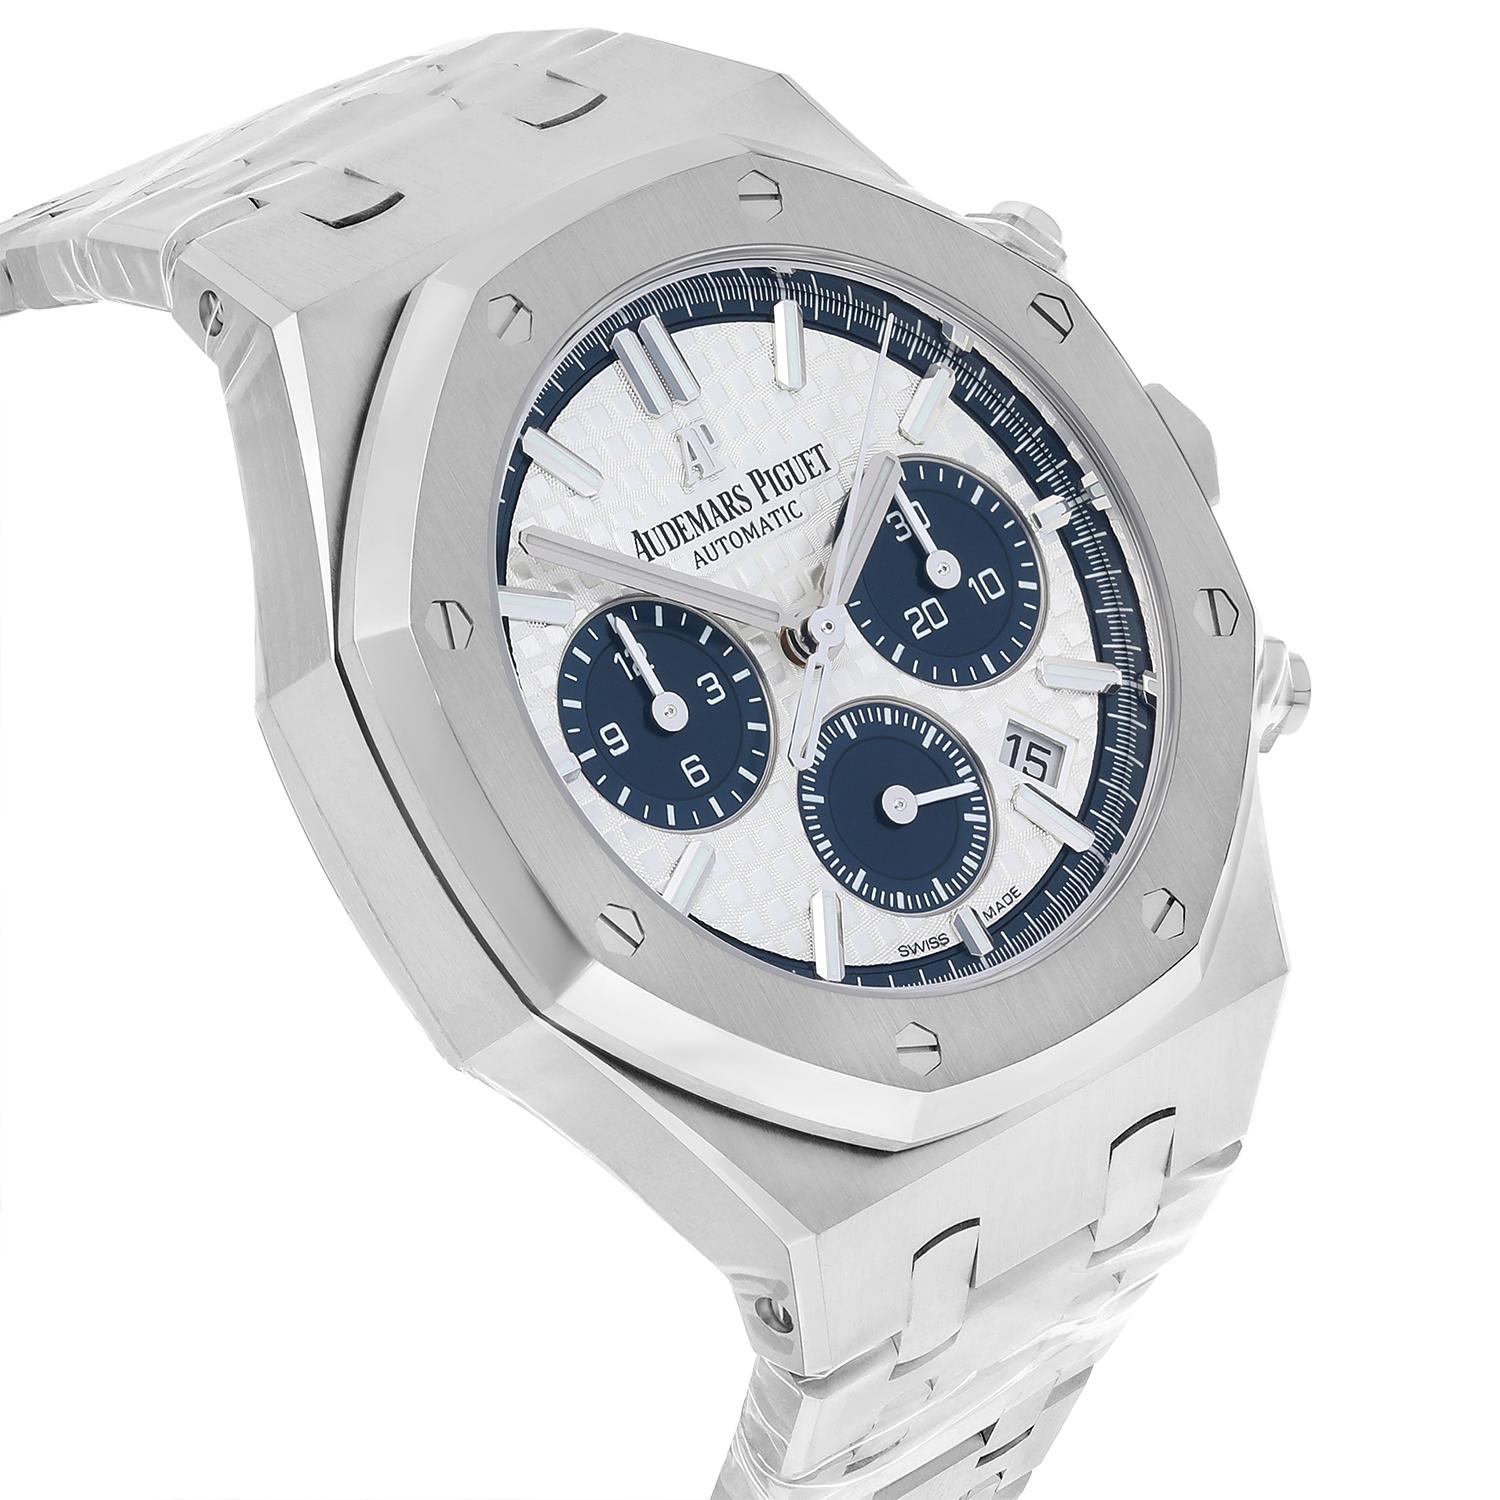 Audemars Piguet Royal Oak Chronograph 38 Steel Silver Dial 26315ST.OO.1256ST.01 In New Condition For Sale In New York, NY